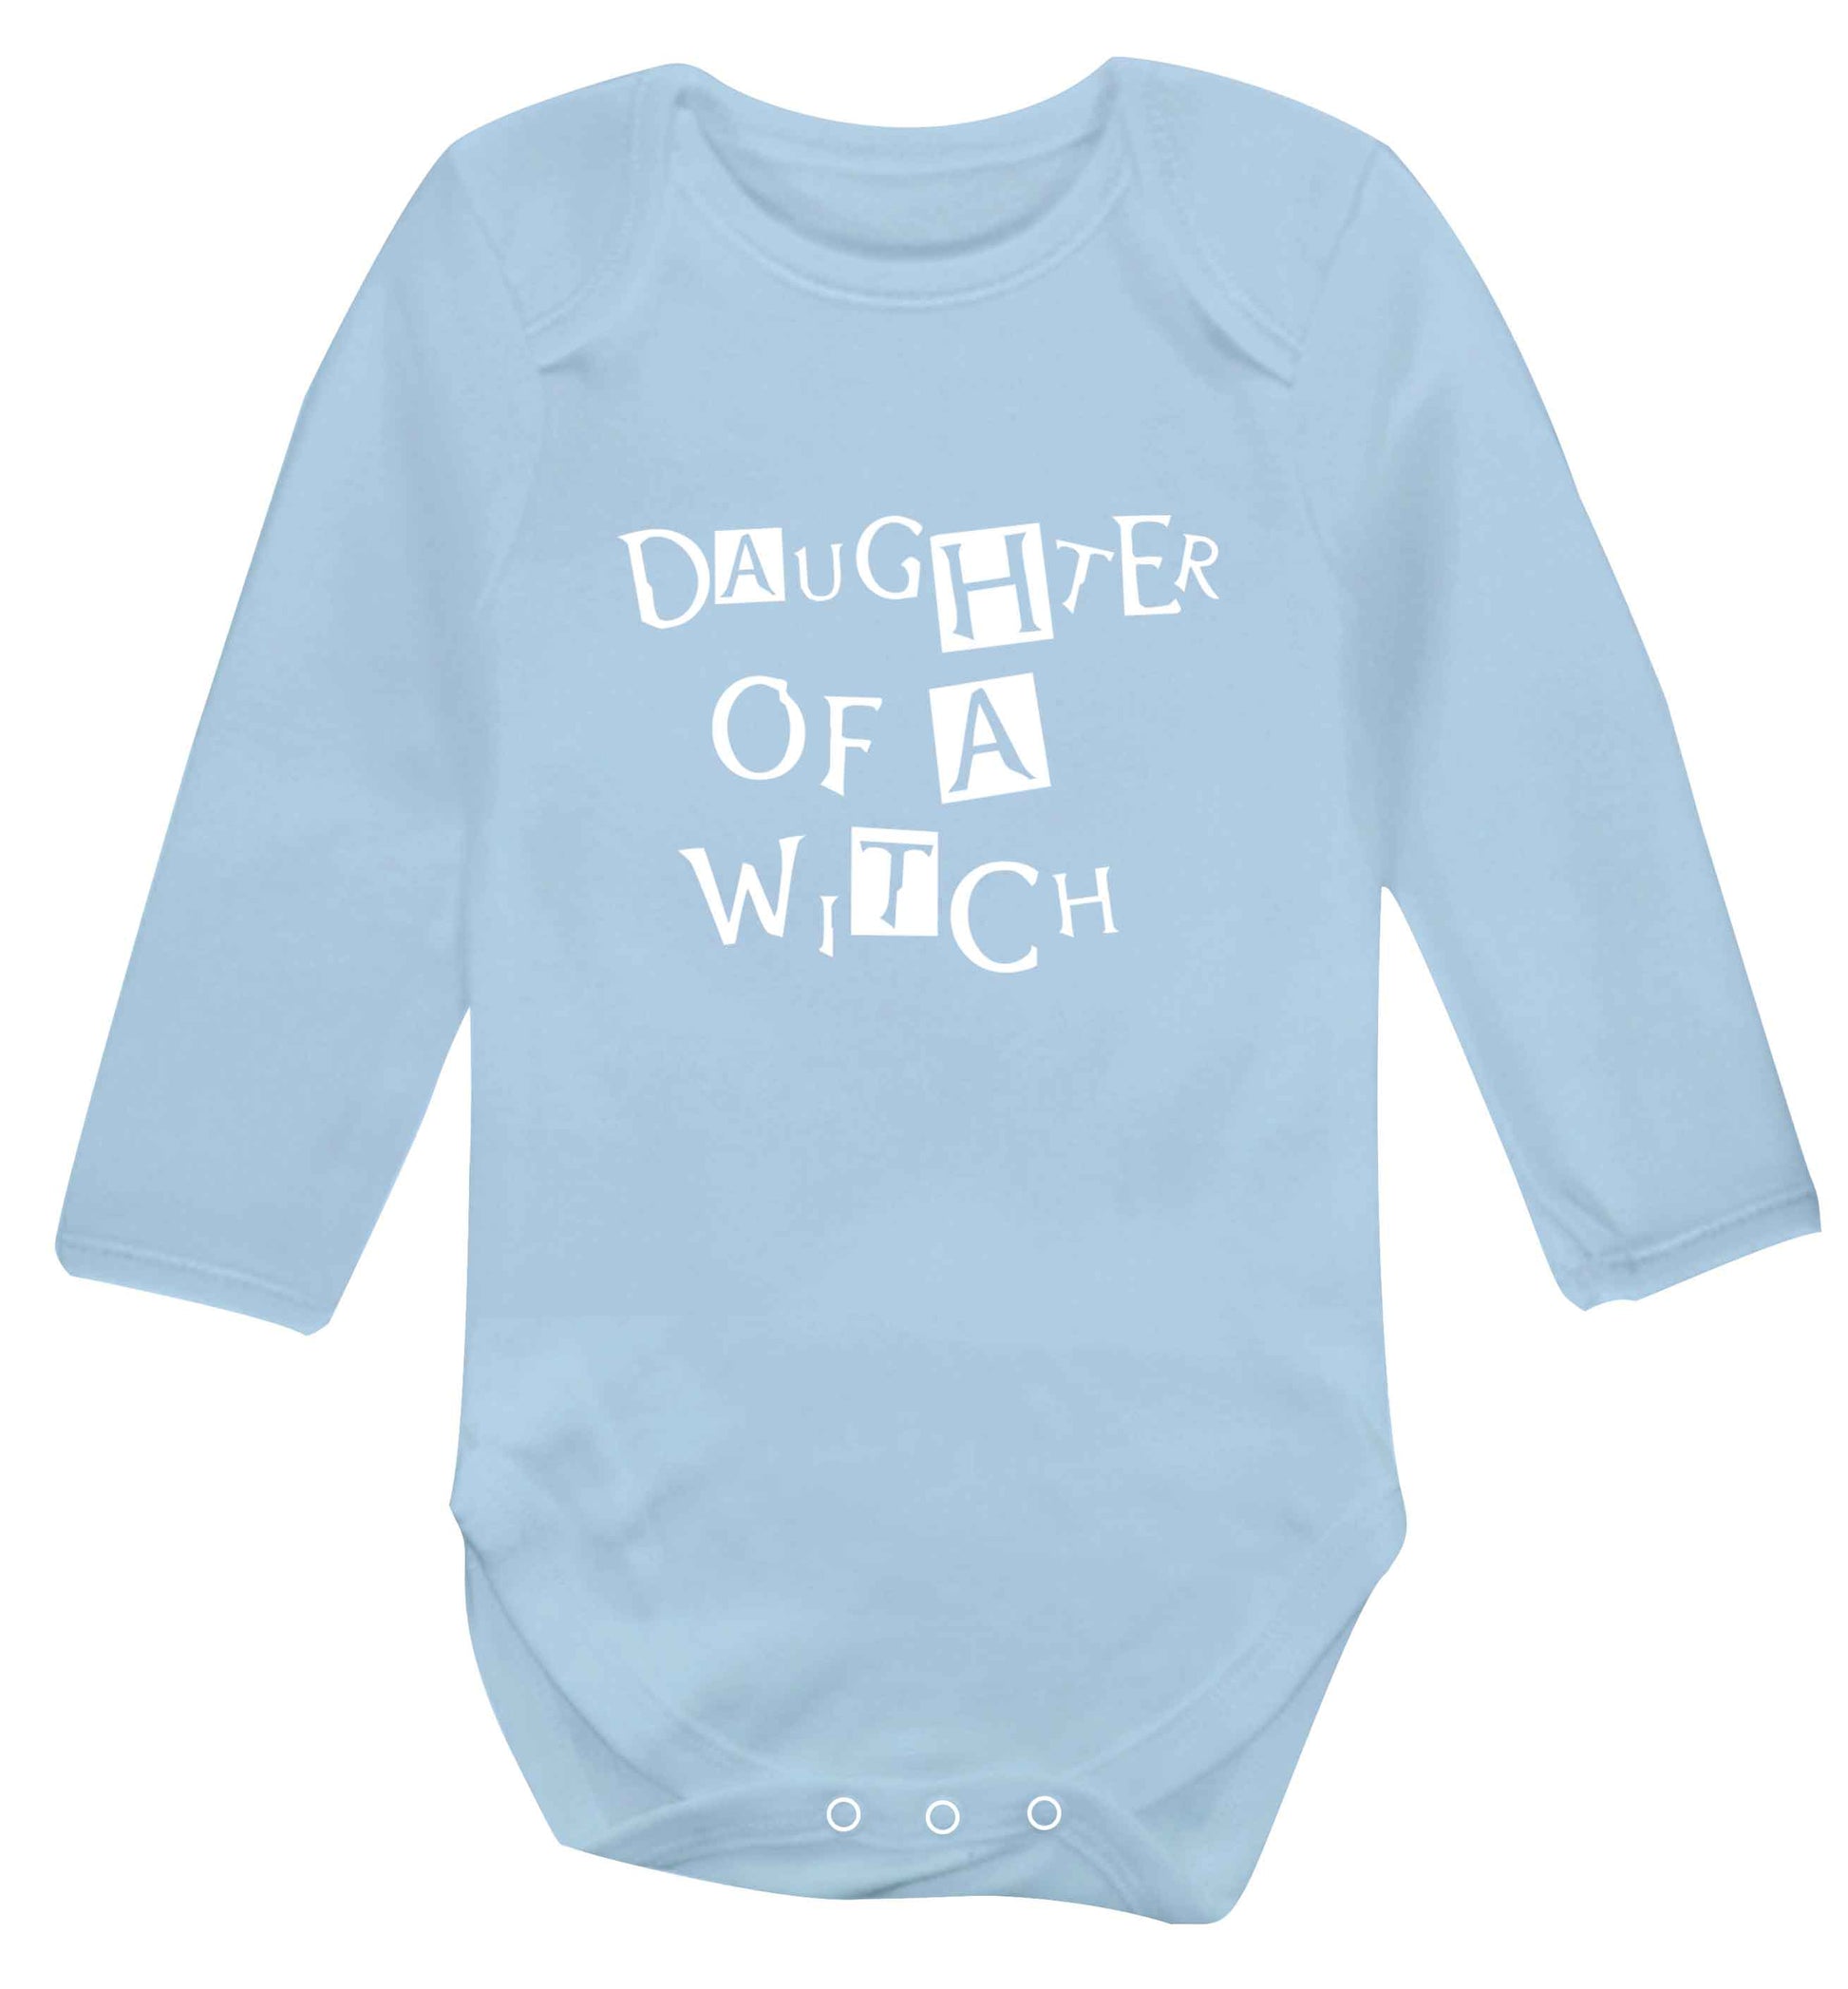 Daughter of a witch baby vest long sleeved pale blue 6-12 months